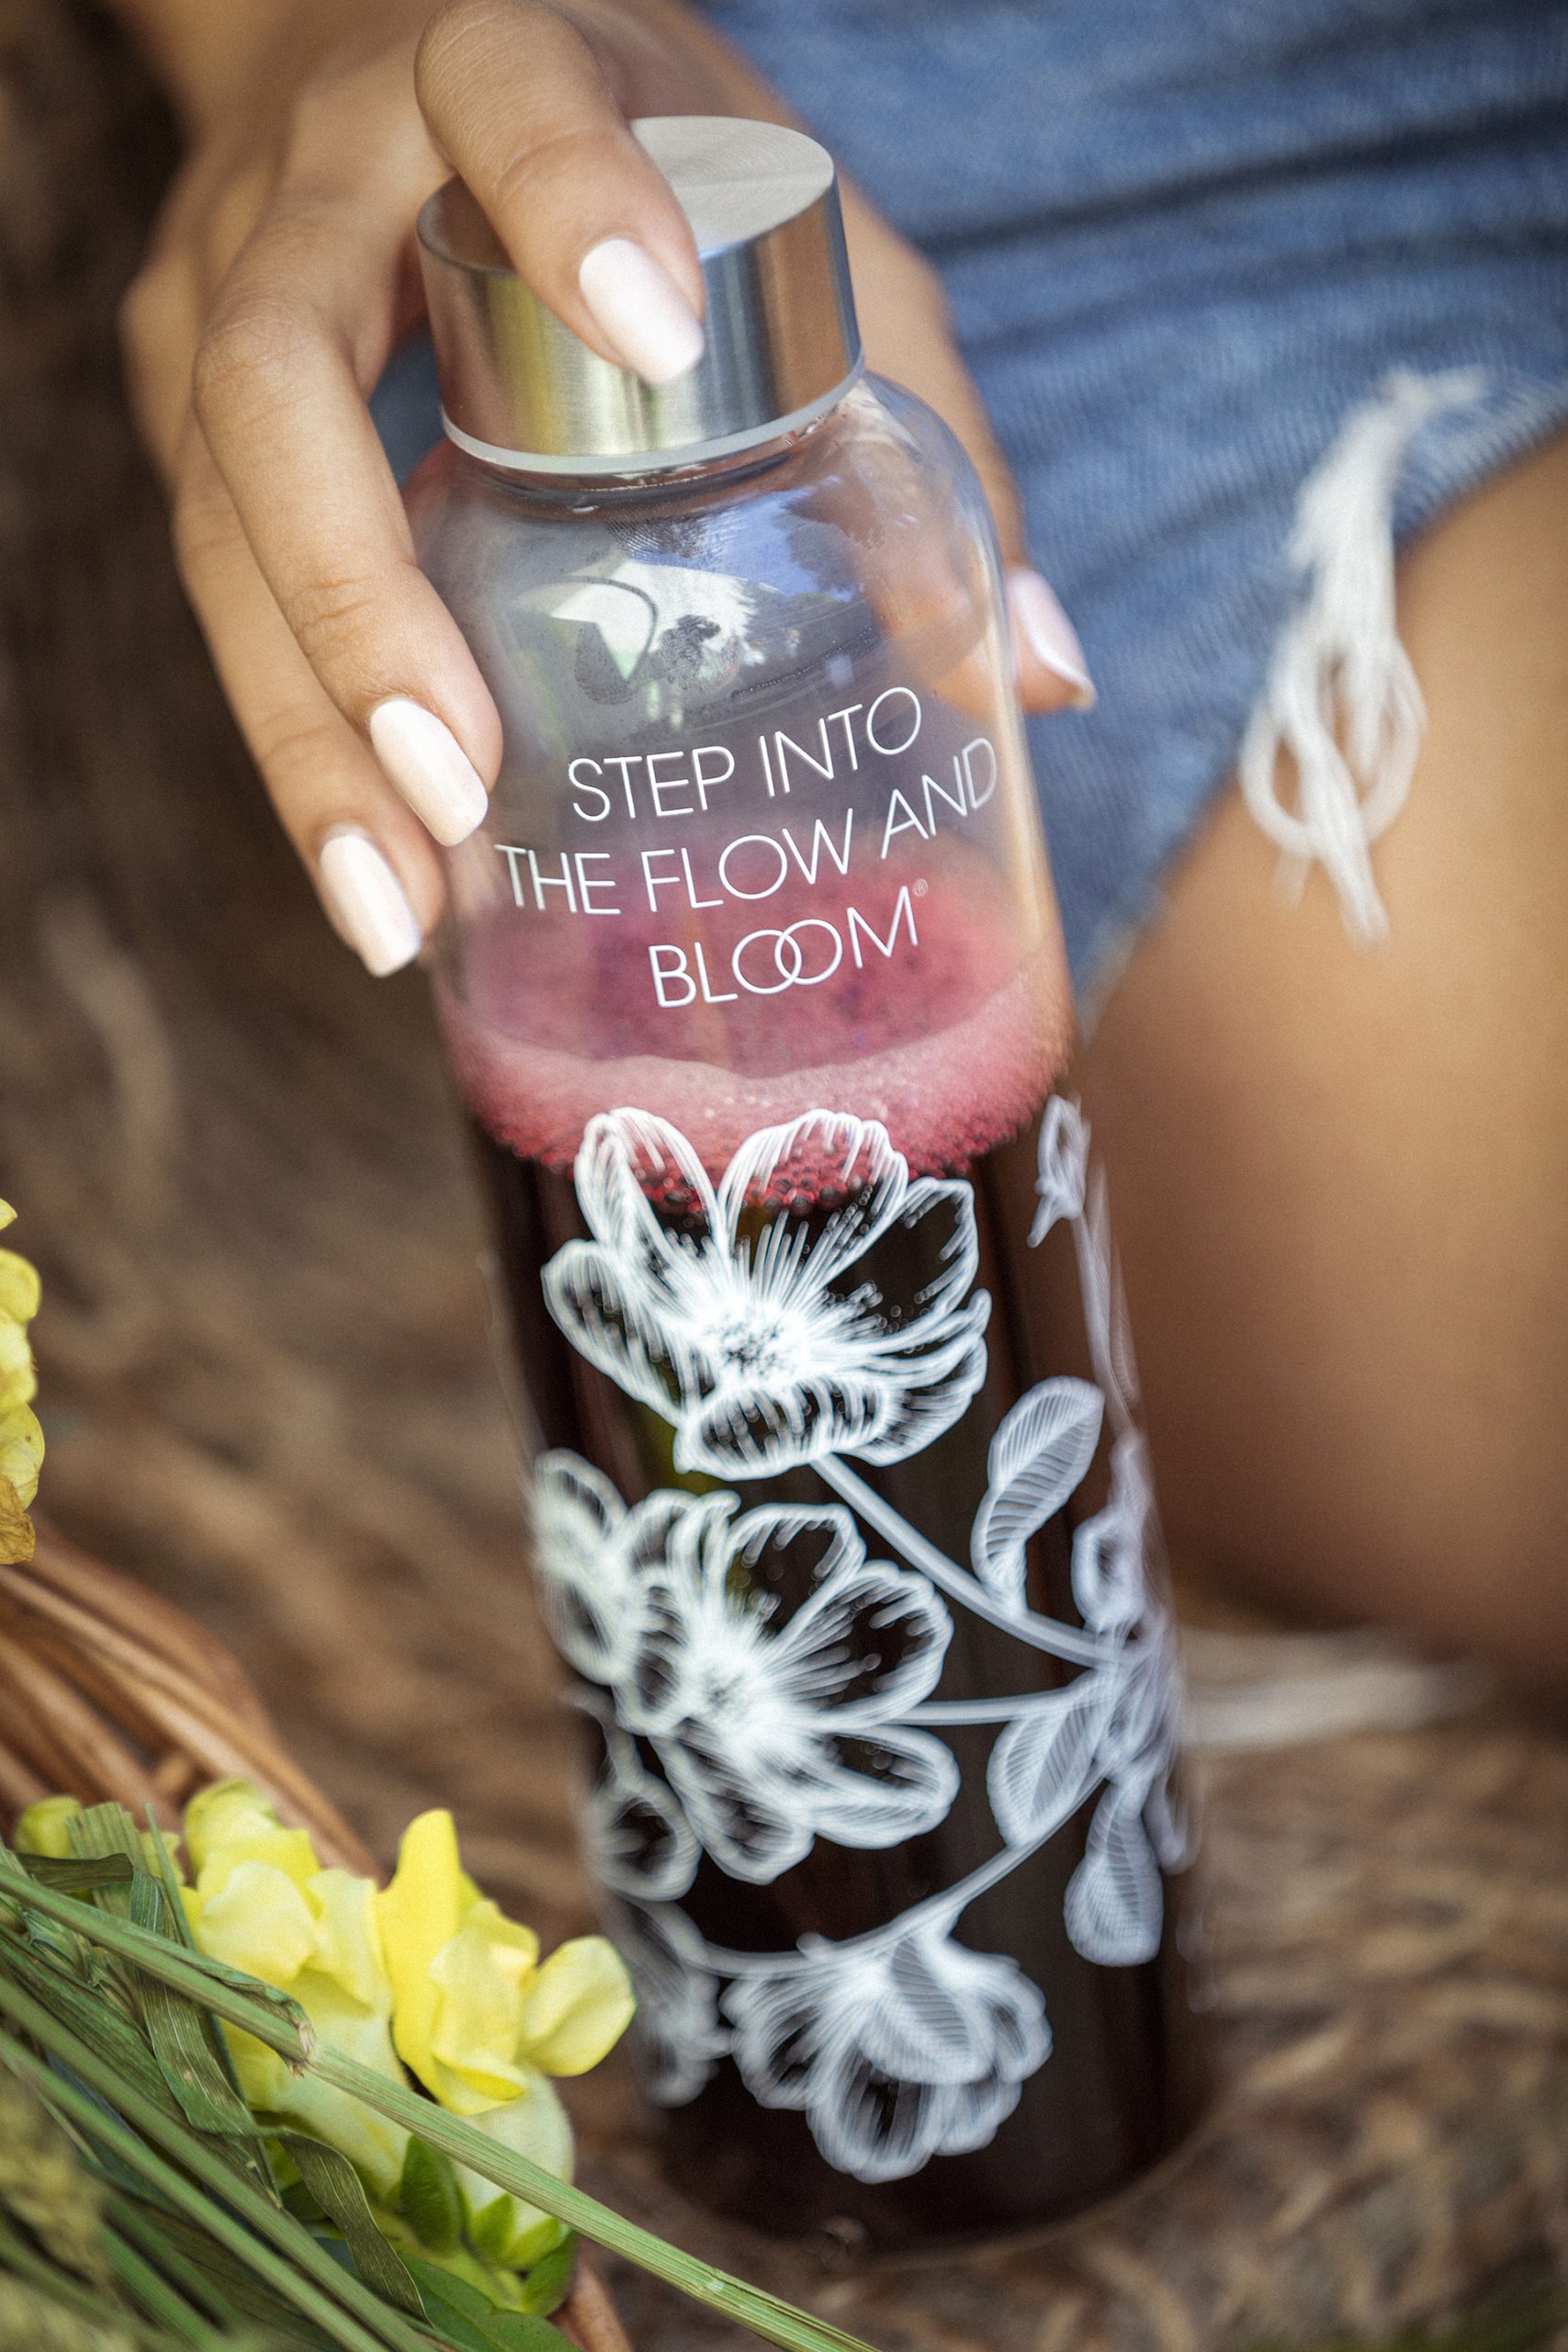 STEP INTO THE FLOW AND BLOOM